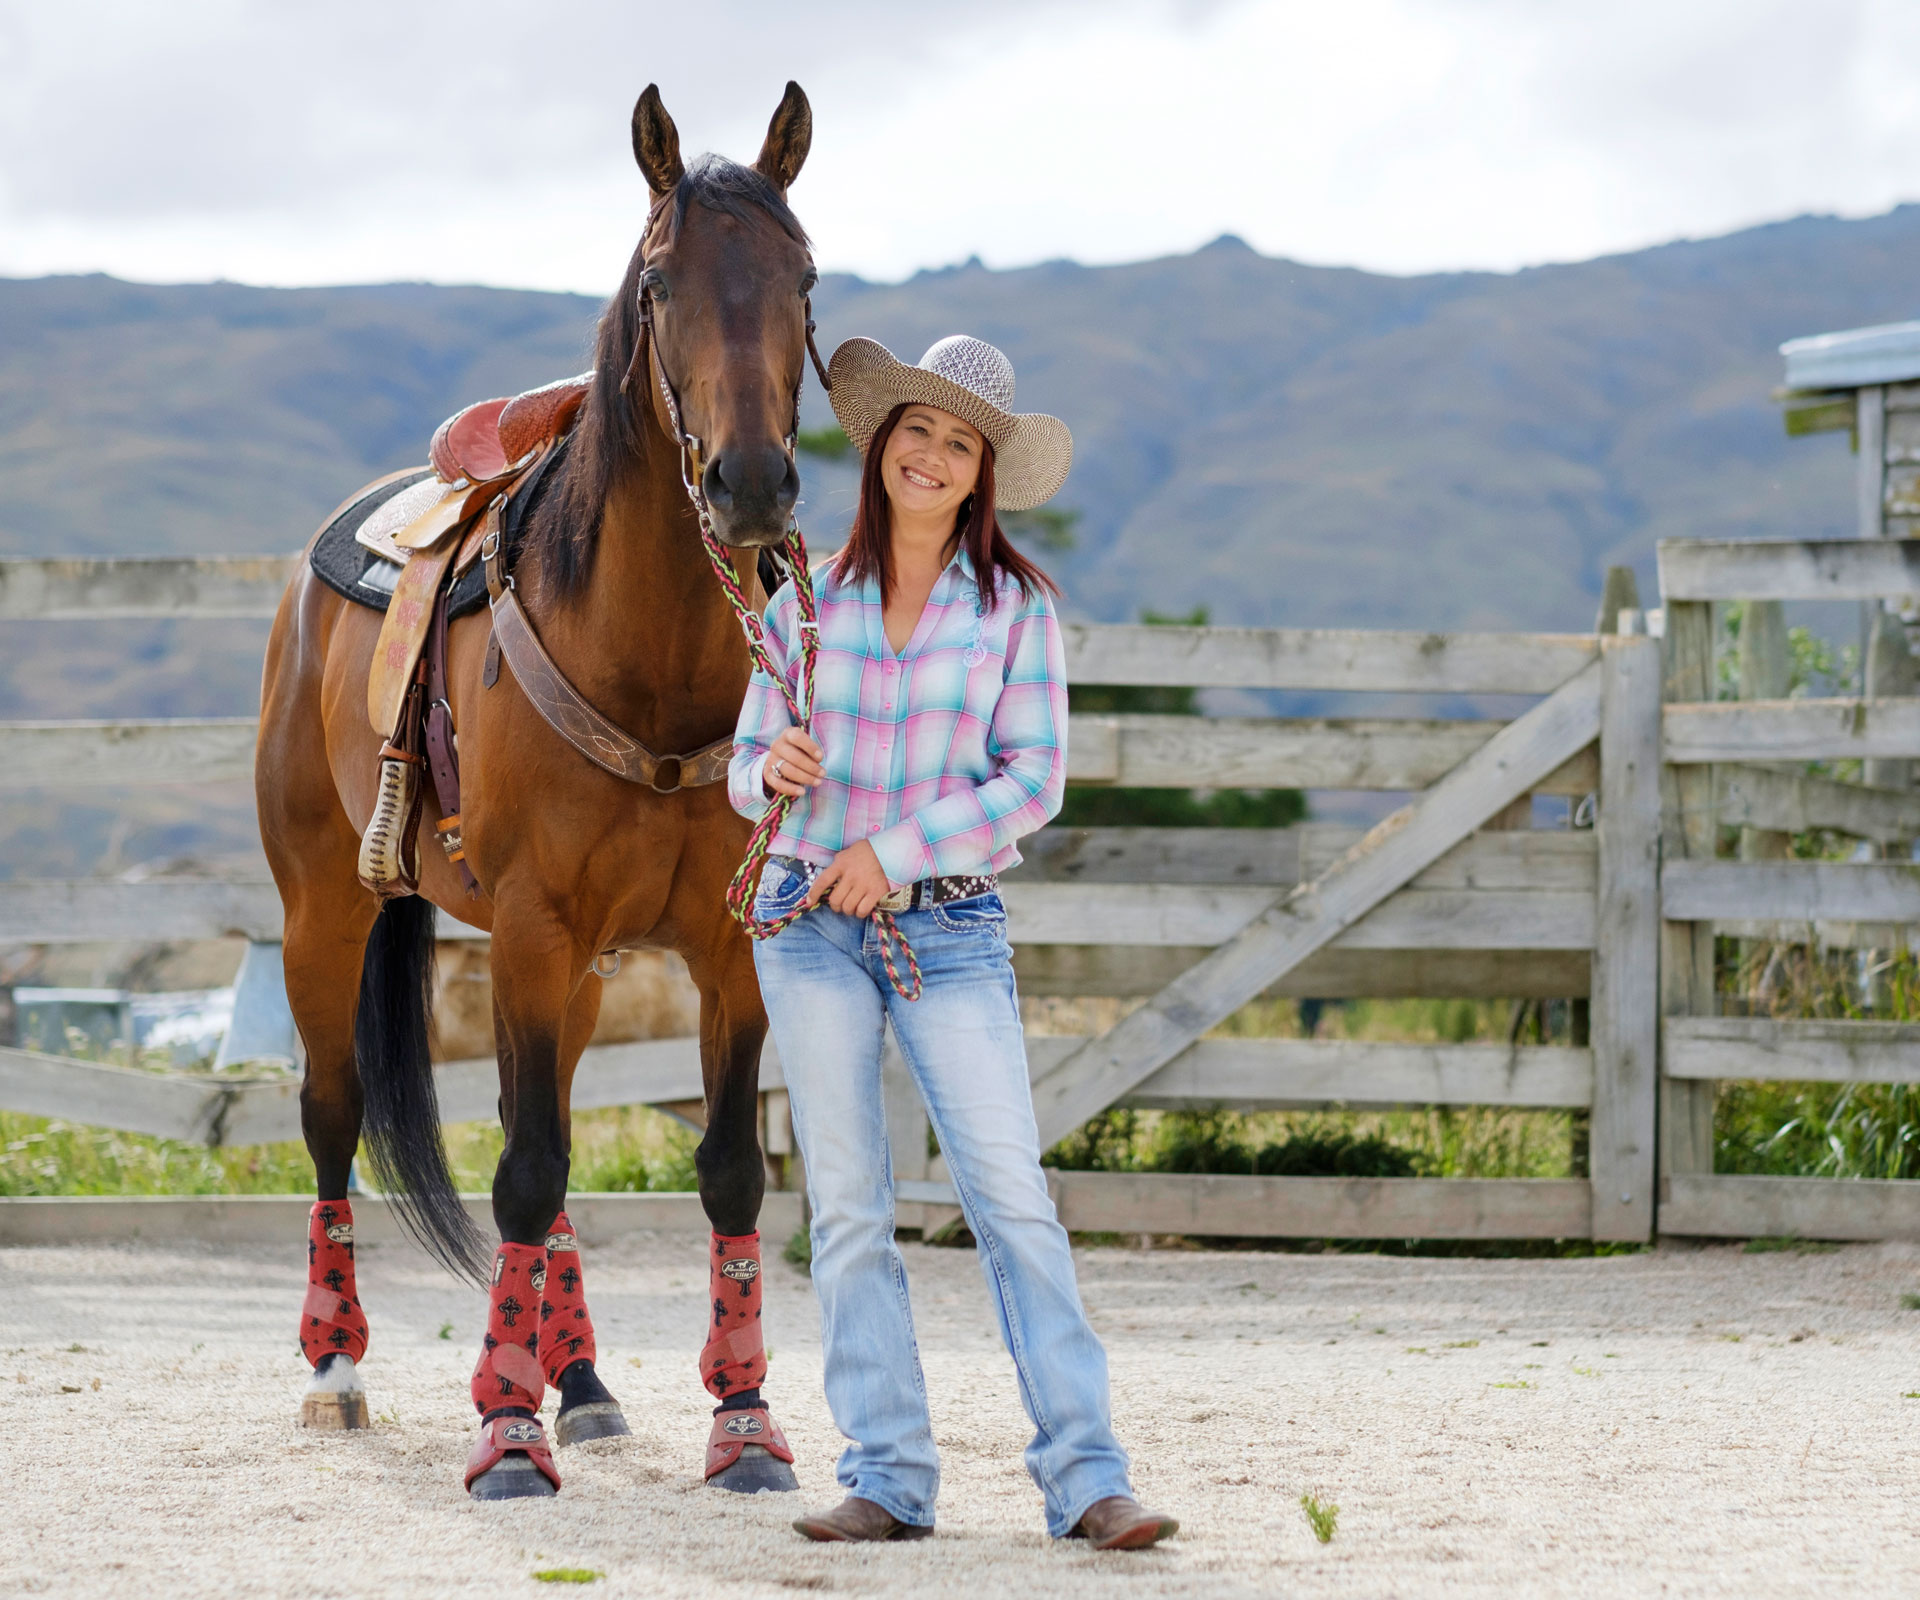 The Kiwi woman born to be a rodeo champ